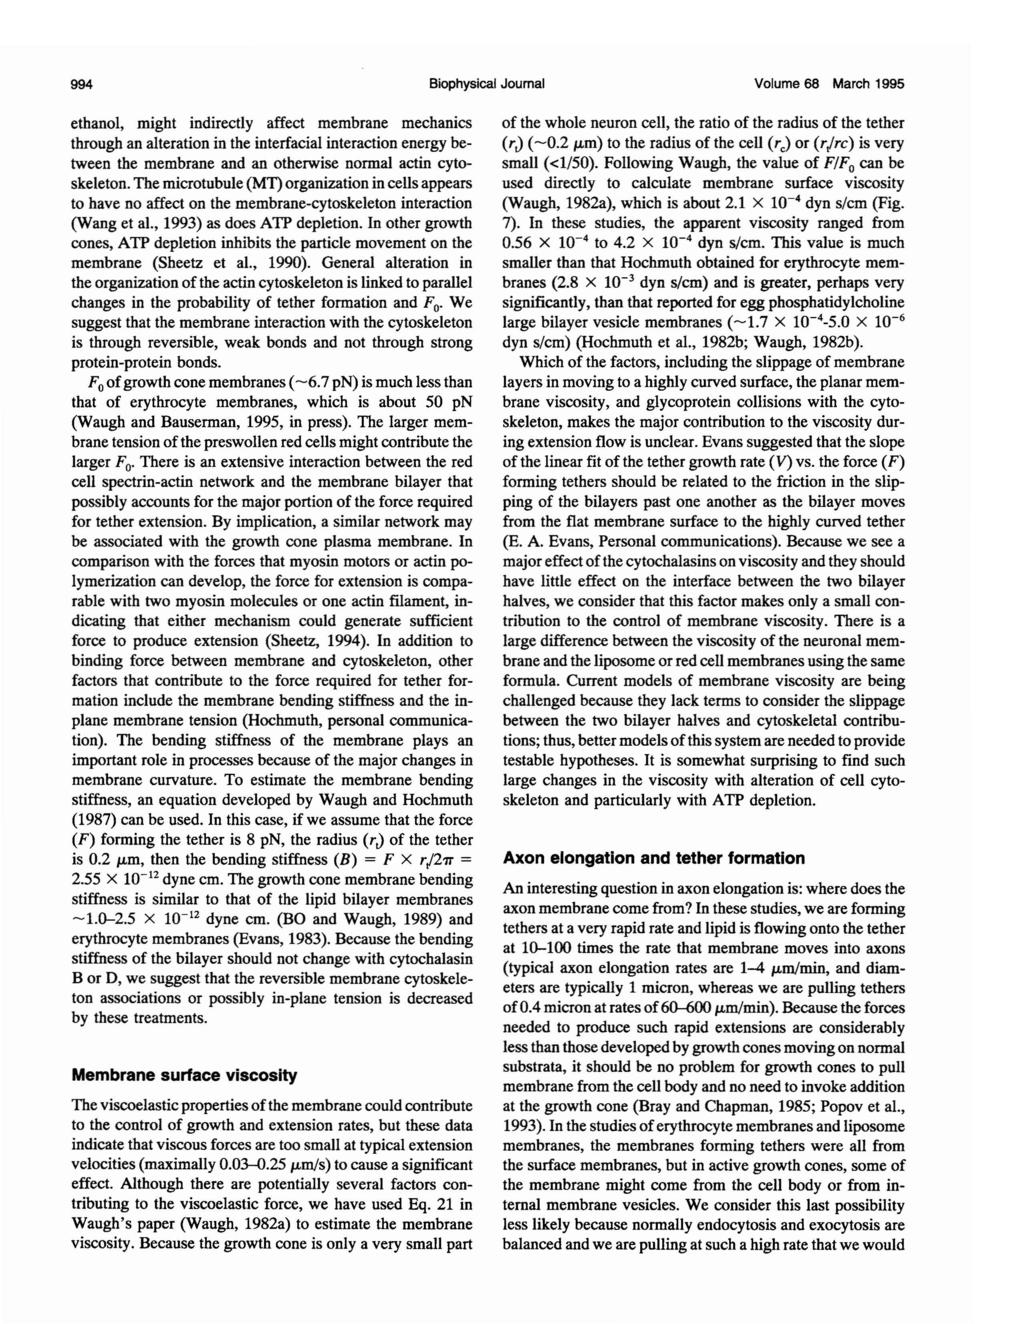 994 Biophysial Journal Volume 68 Marh 1995 ethanol, might indiretly affet membrane mehanis through an alteration in the interfaial interation energy between the membrane and an otherwise normal atin